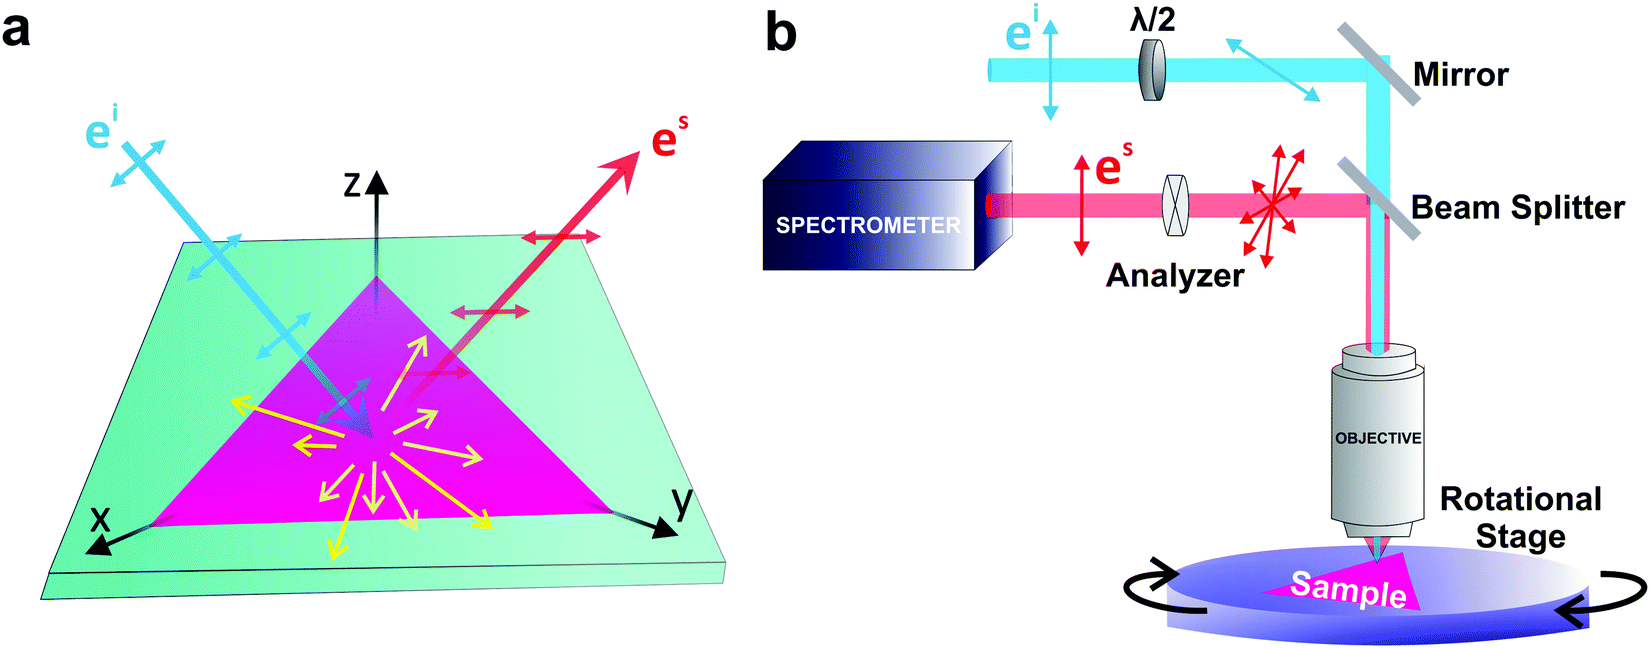 Polarized Raman spectroscopy in low-symmetry 2D materials: angle-resolved  experiments and complex number tensor elements - Physical Chemistry  Chemical Physics (RSC Publishing) DOI:10.1039/D1CP03626B